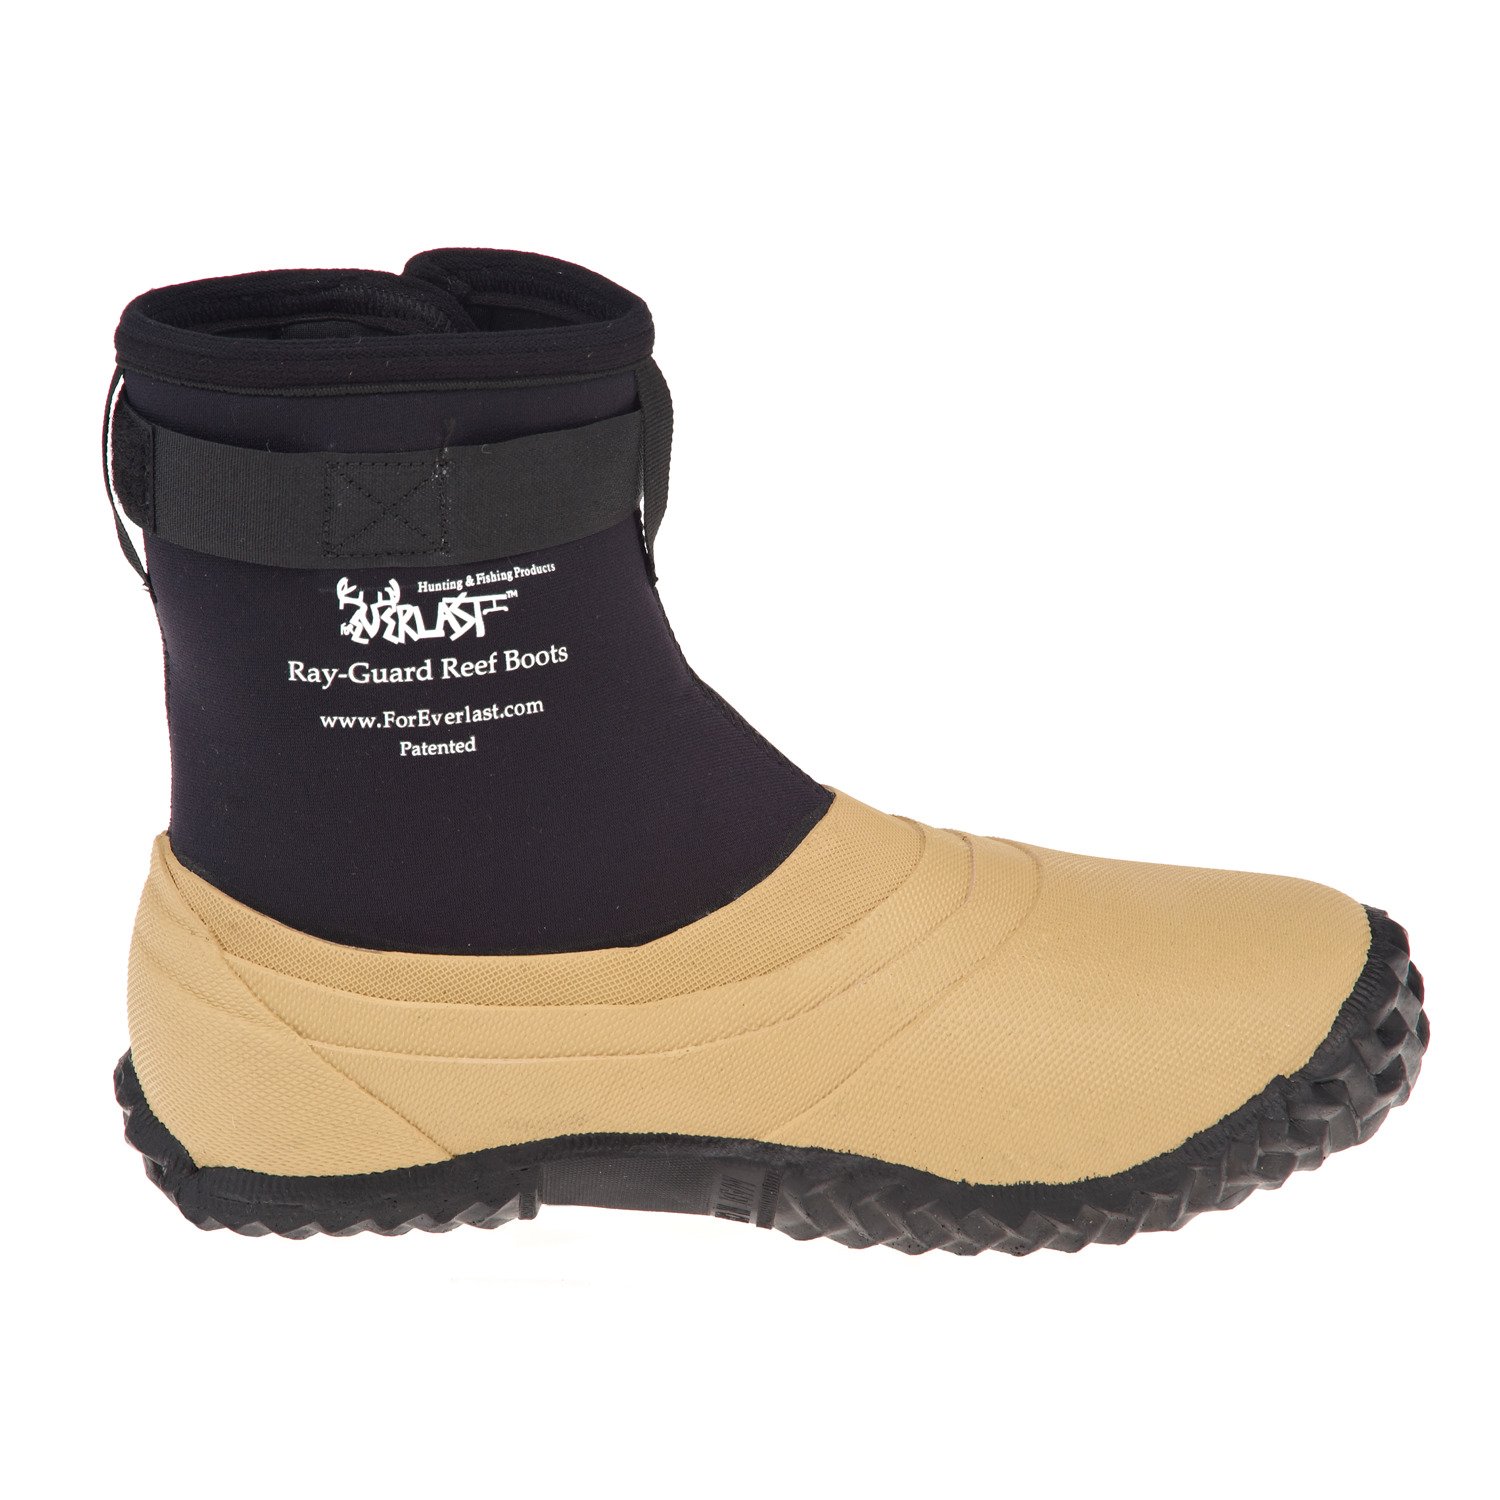 Wading Boots | Wading Boots For Men and Women, Neoprene Wading Boots ...